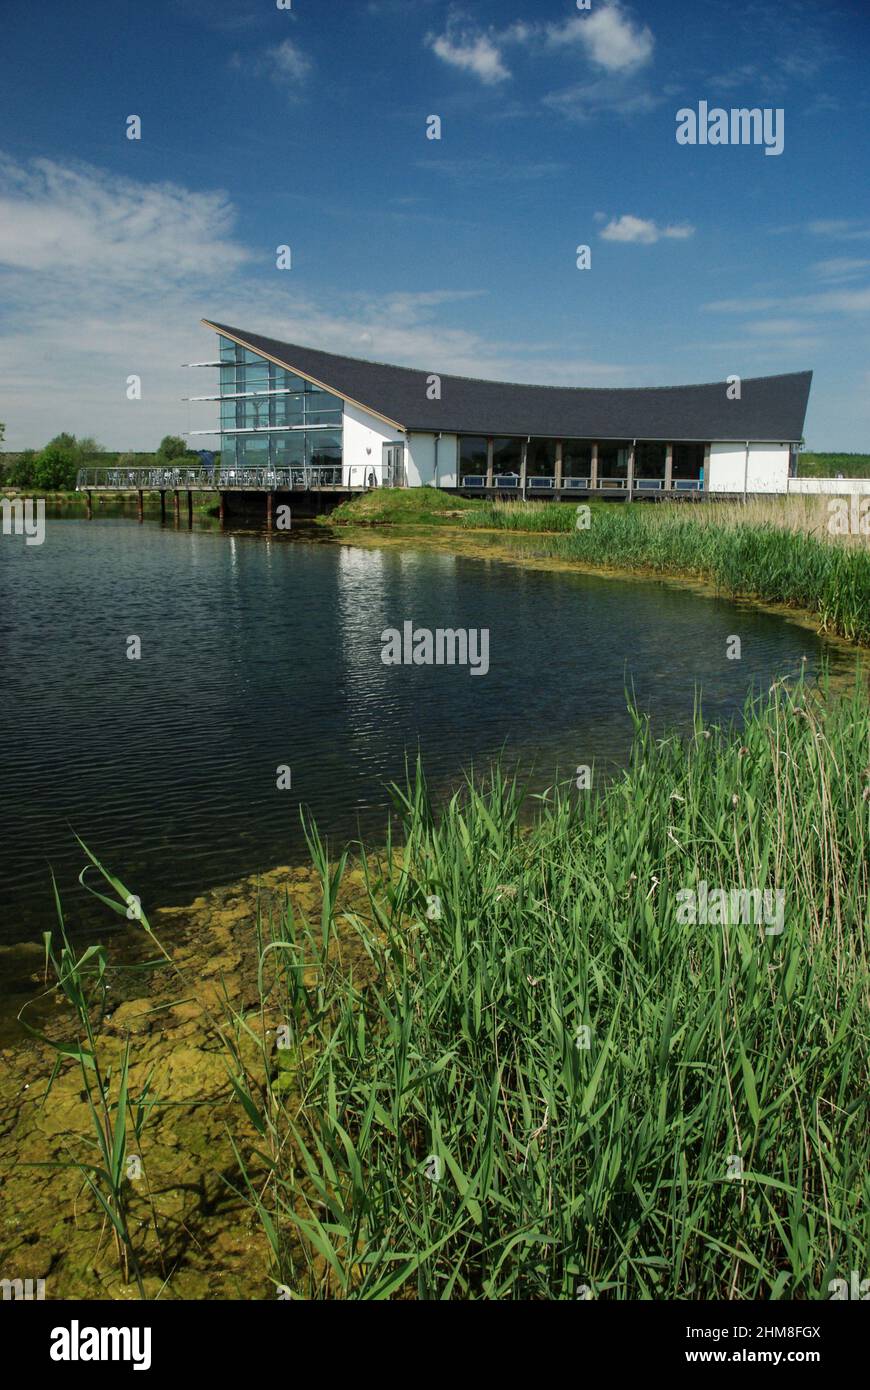 The Visitor Centre at Stanwick Lakes, a countryside attraction and nature reserve, Northamptonshire, UK Stock Photo